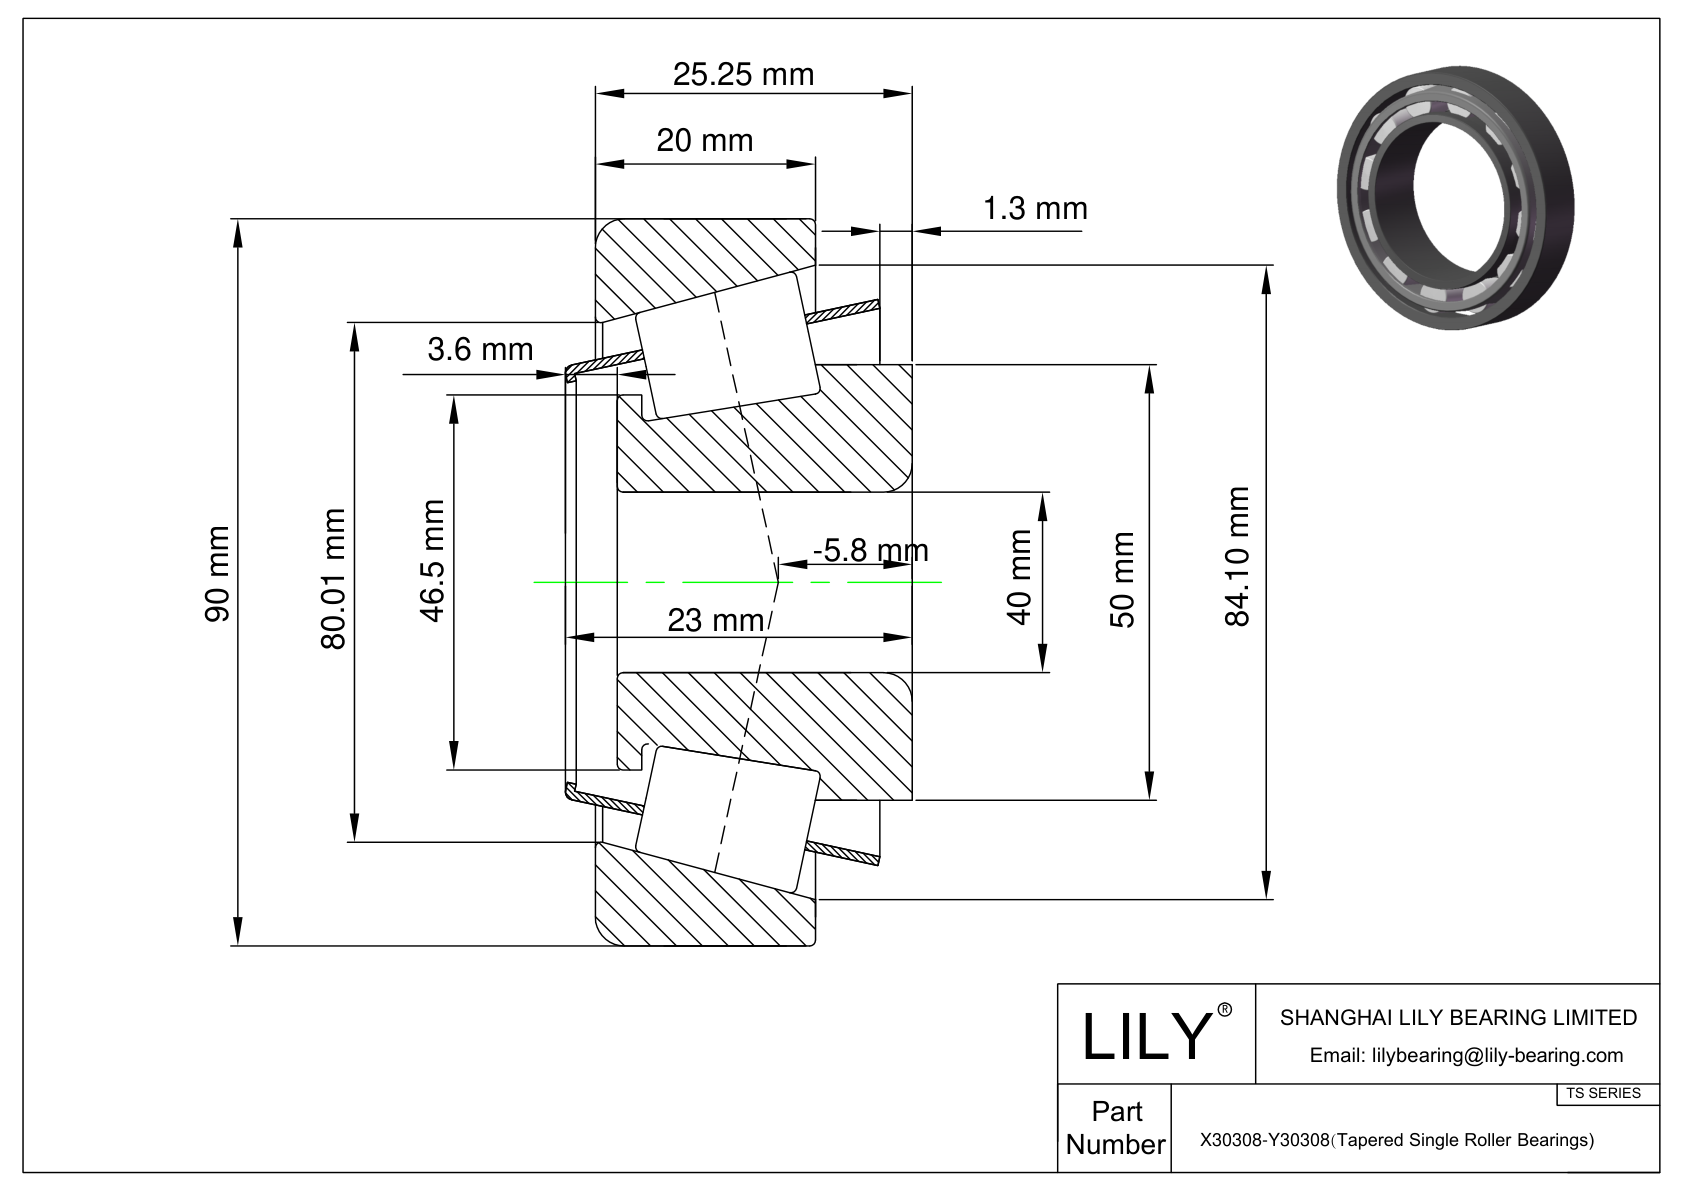 X30308-Y30308 TS (Tapered Single Roller Bearings) (Metric) cad drawing